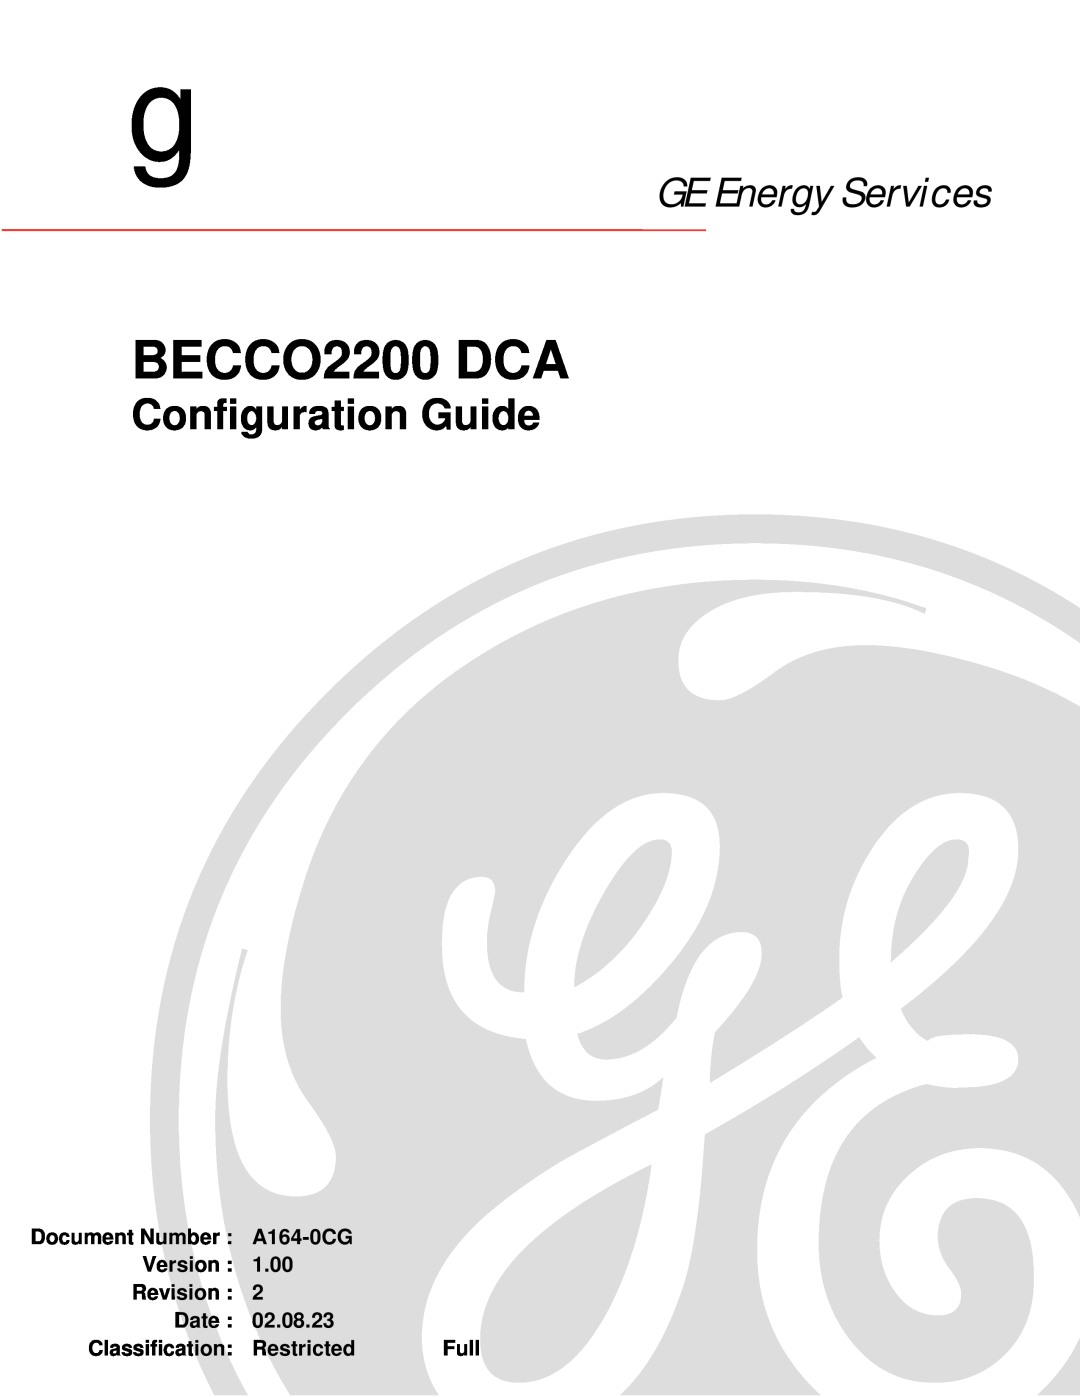 GE manual Configuration Guide, BECCO2200 DCA, GE Energy Services, A164-0CG, Version, 1.00, Revision, Date, 02.08.23 